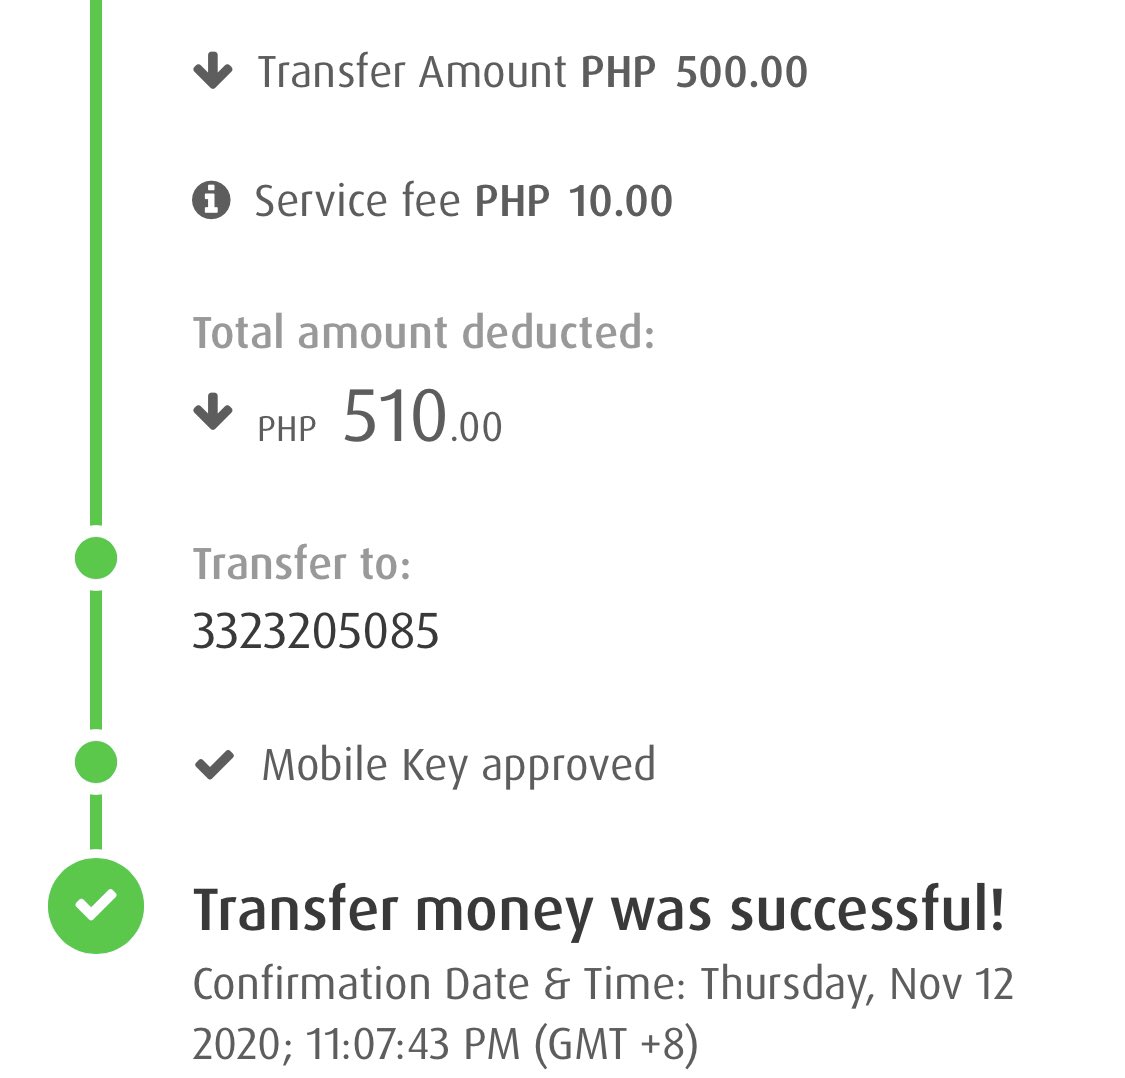 Donated ₱500 to  @salinlahiphils and TFCOS, who are distributing hot meals, food packs and hygiene kits to children and their families in affected communities. They're also hoping to provide psychosocial support for these children. Match me.